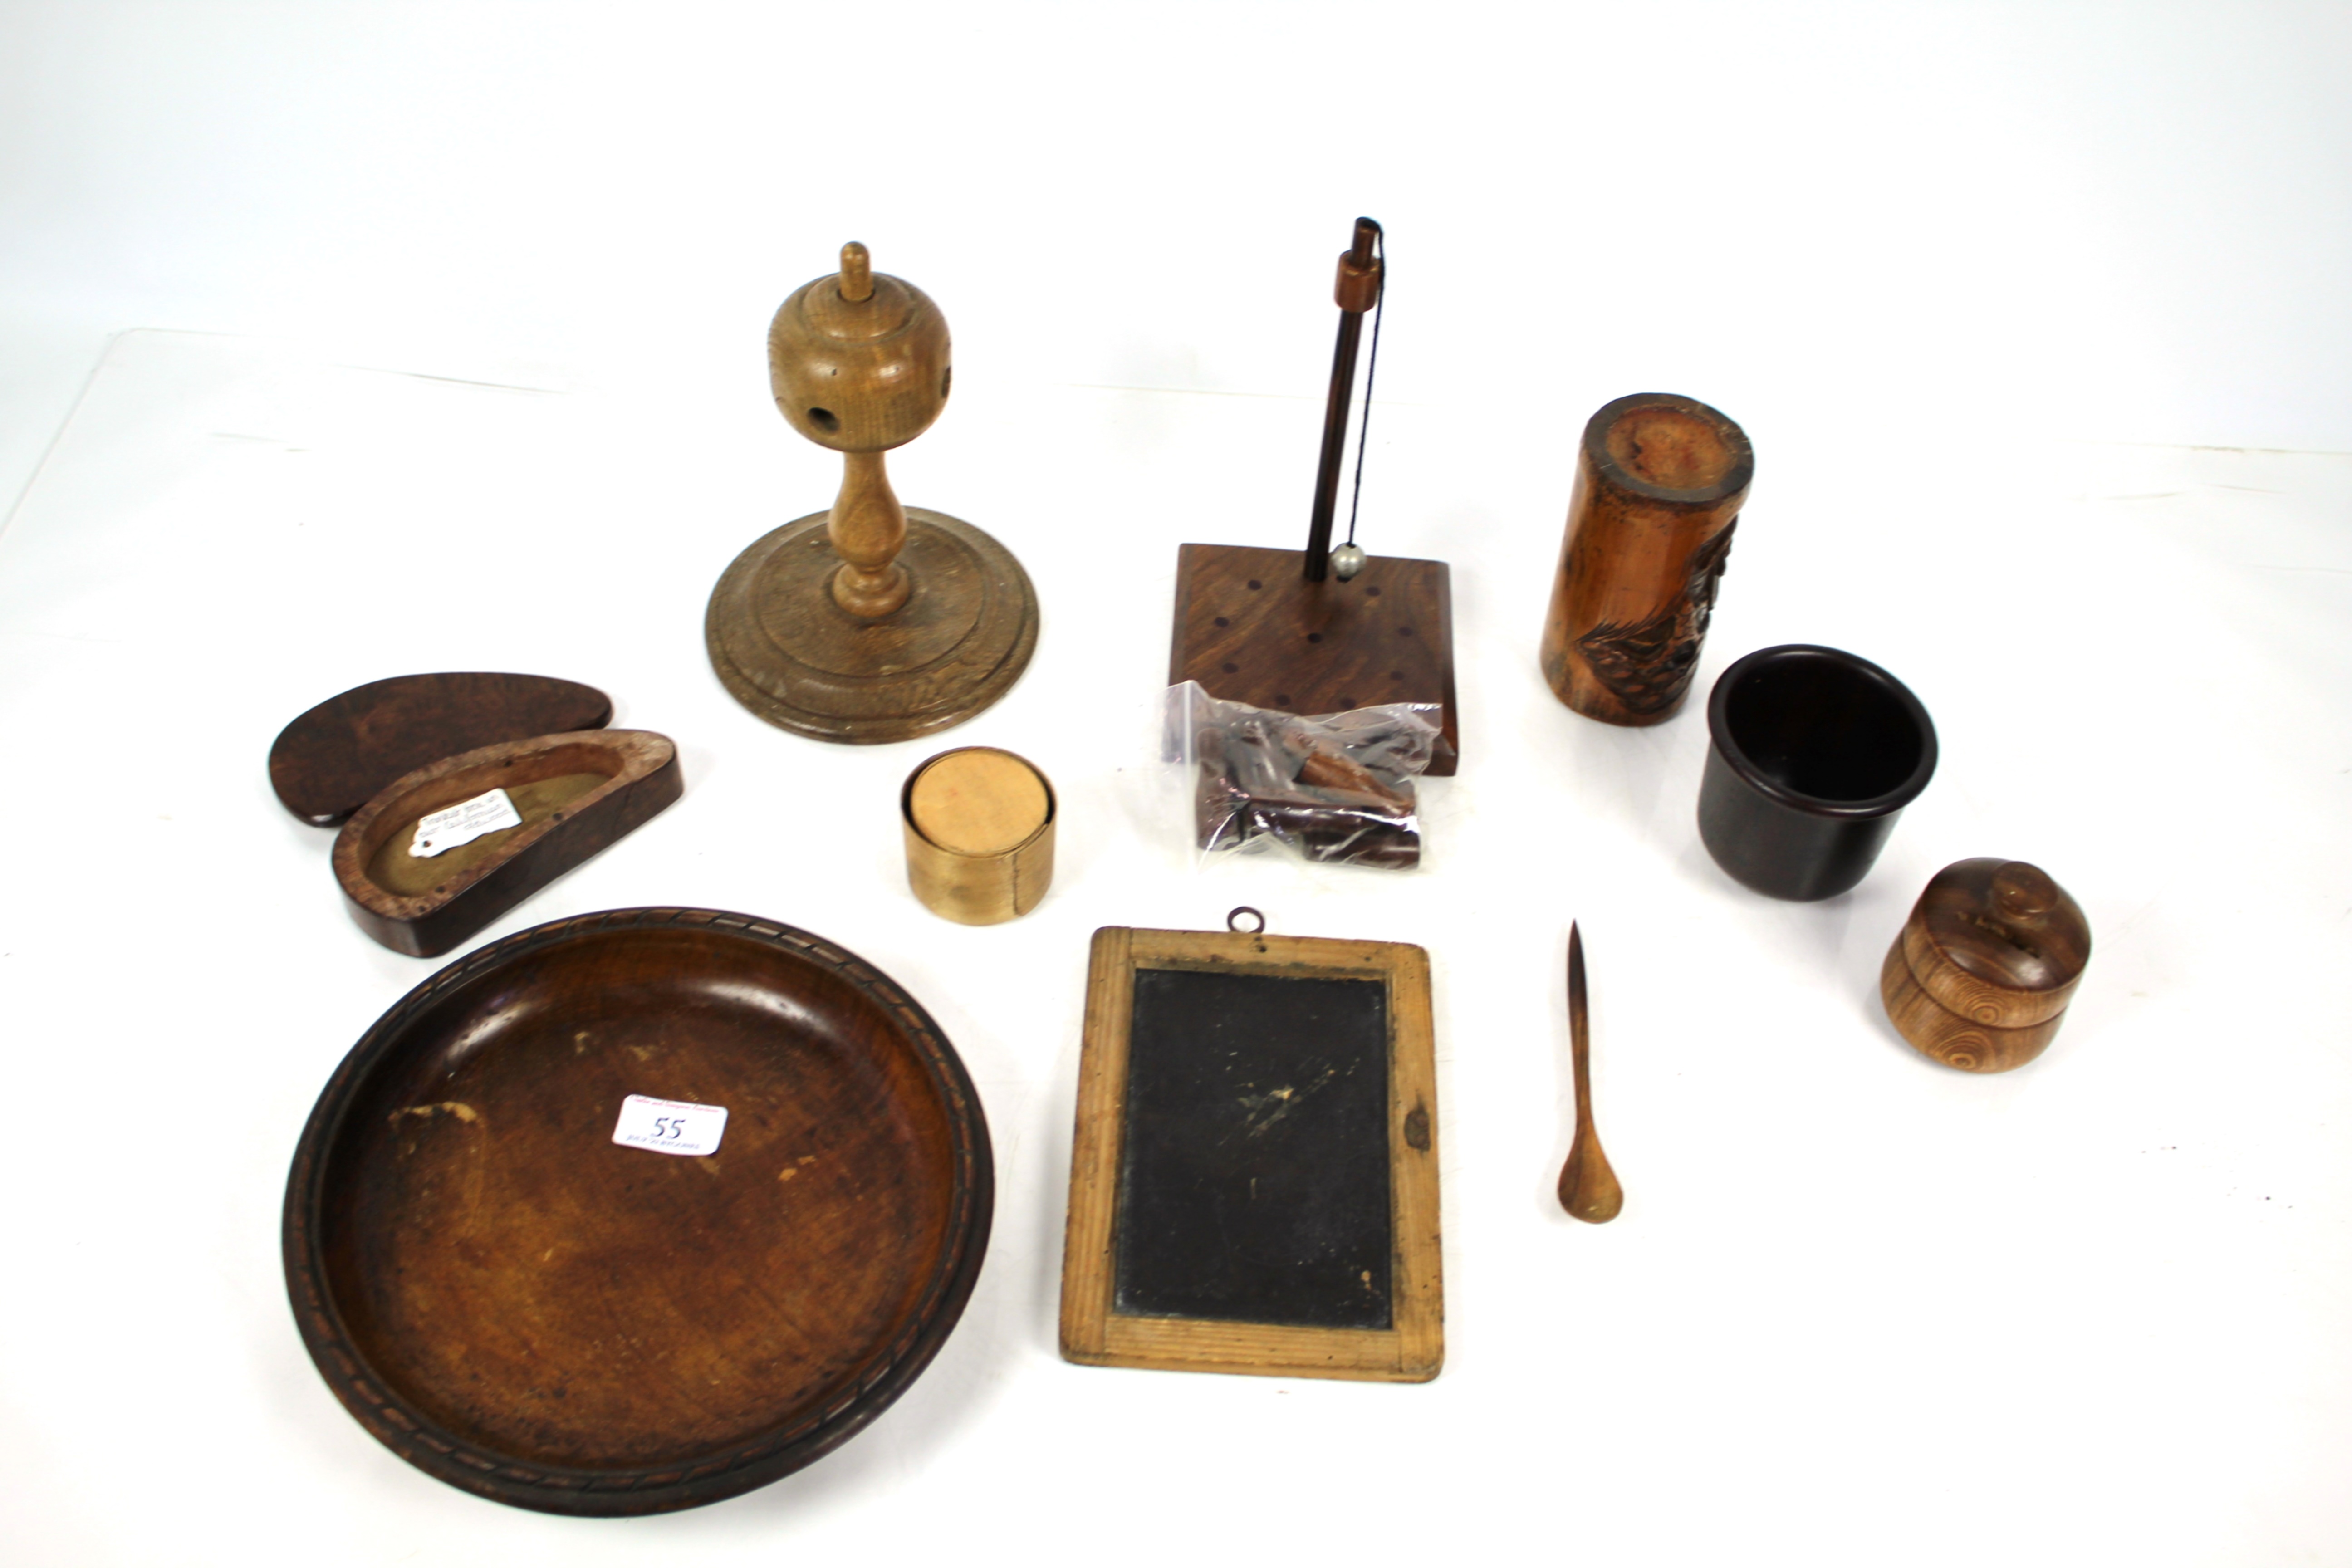 A box of miscellaneous treen items including a min